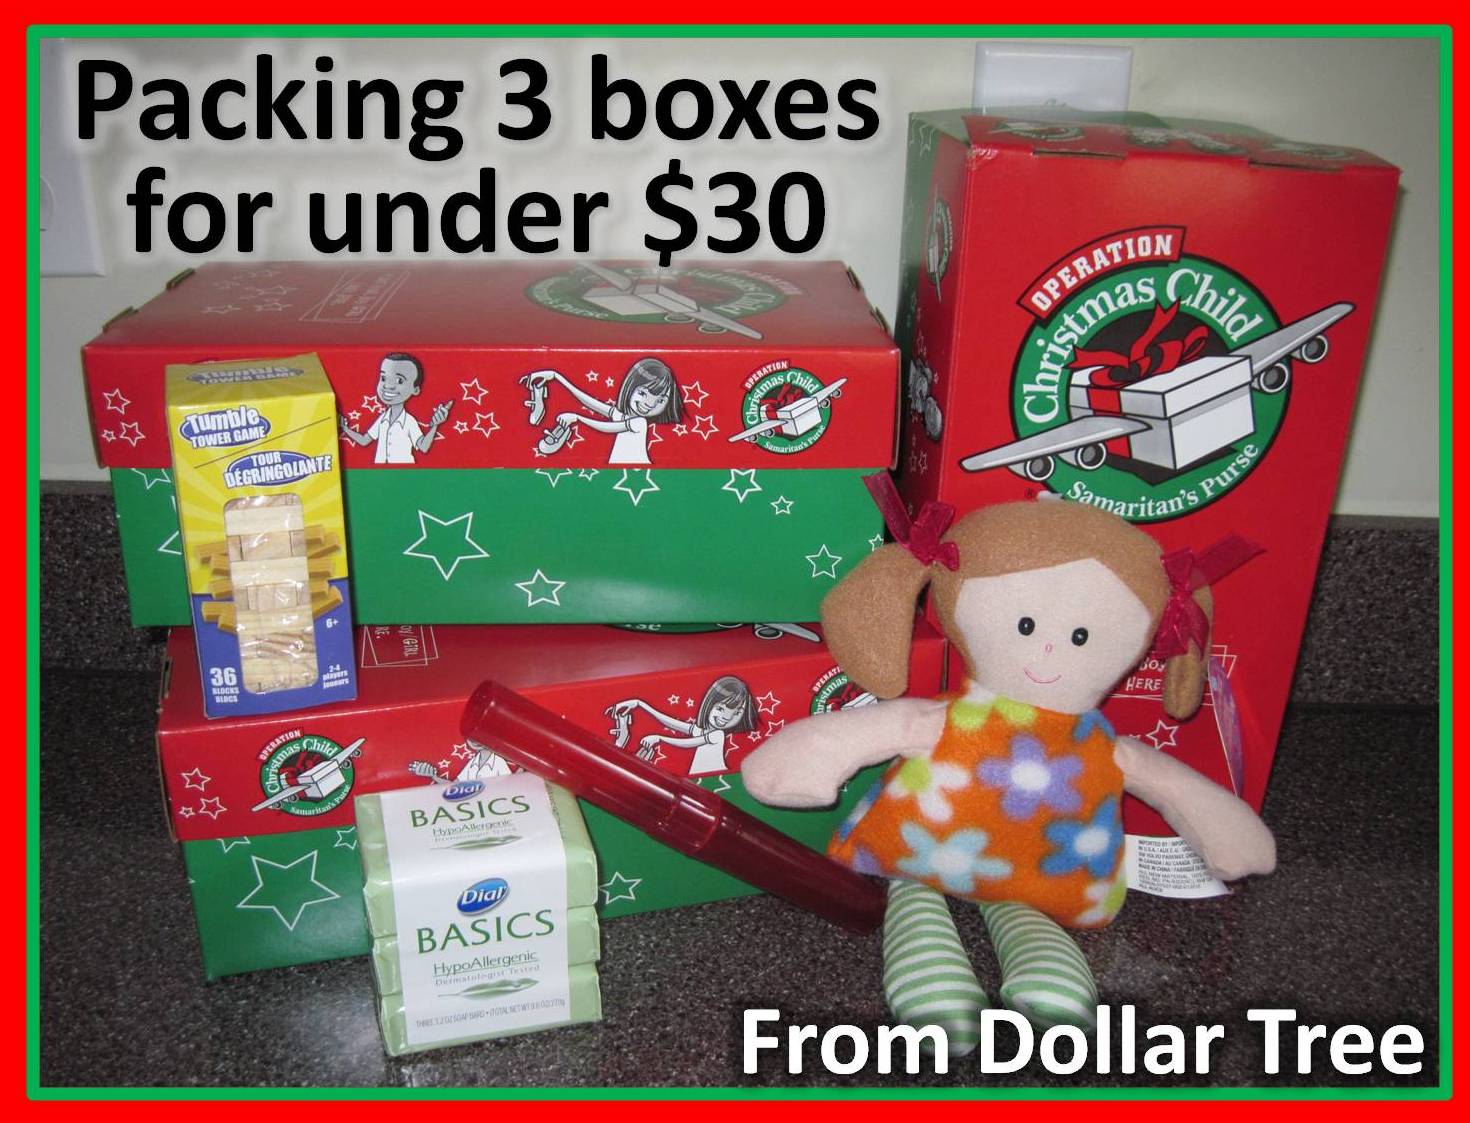 Operation Christmas Child - If anyone has a Dollar Tree they want